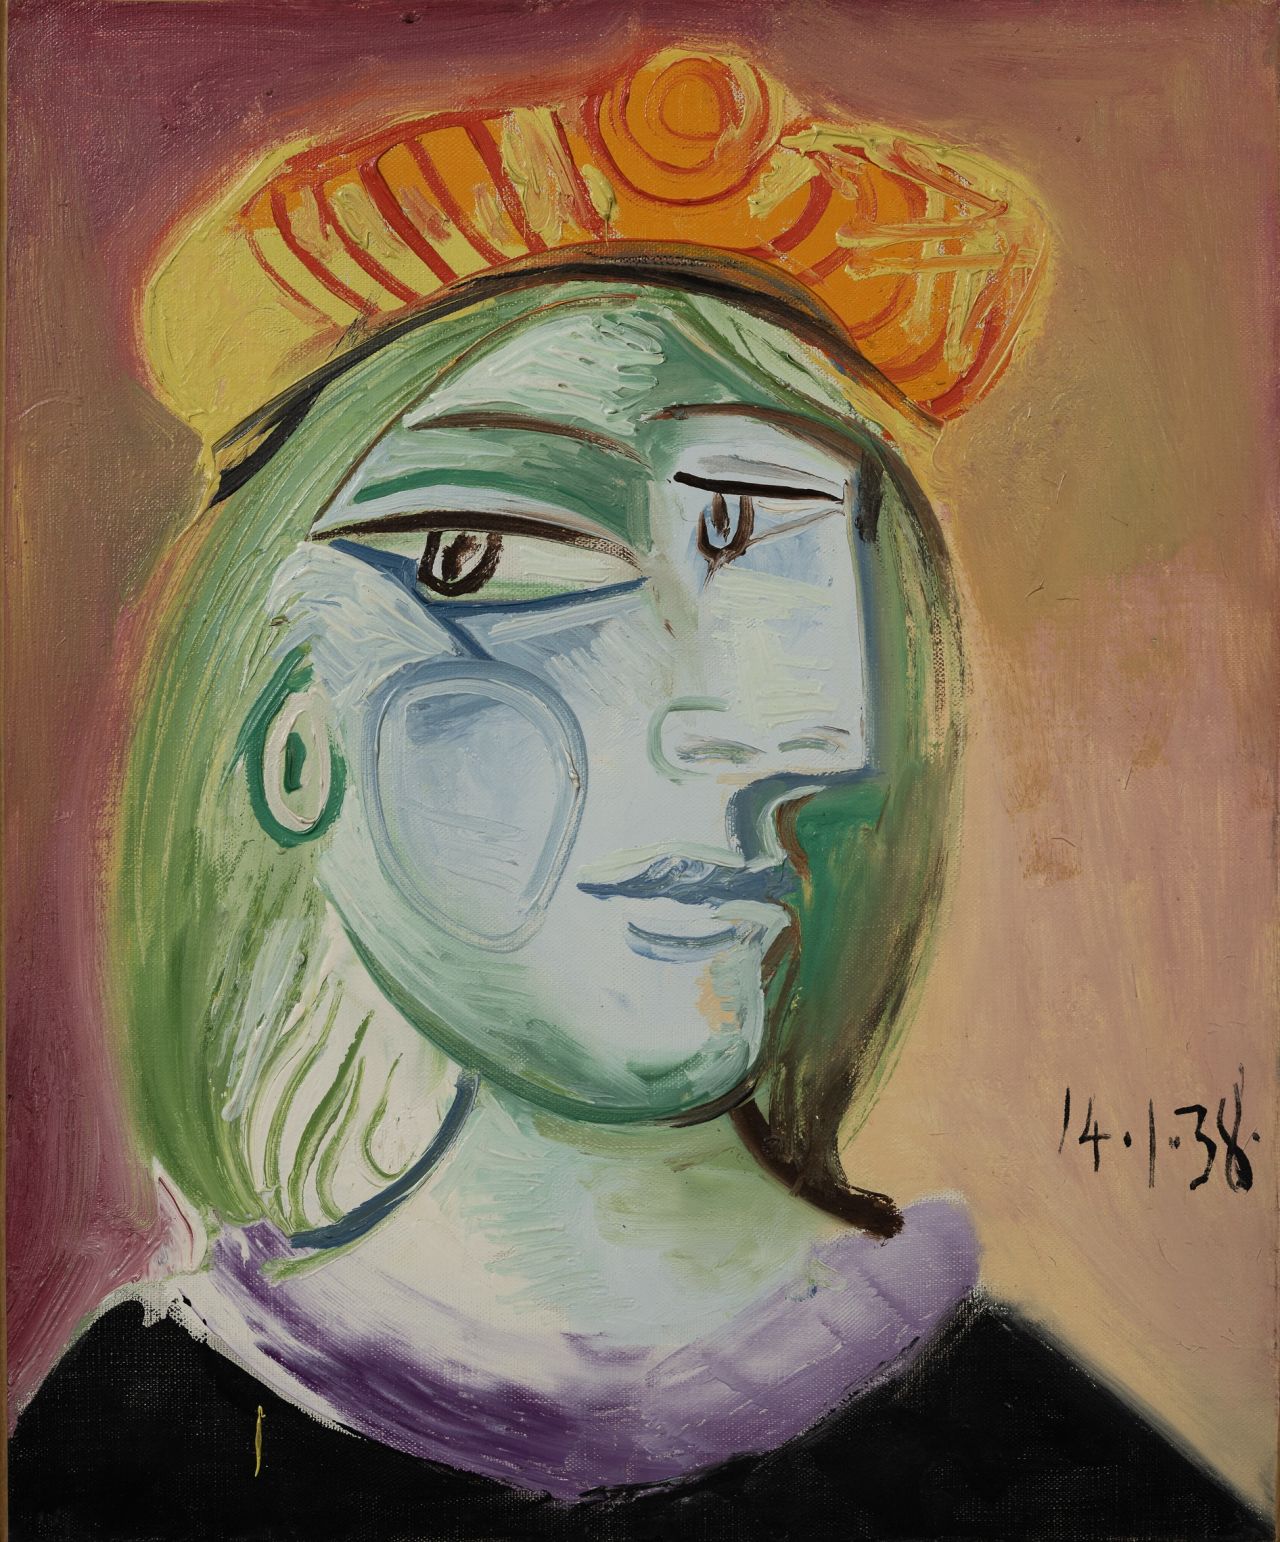 Pablo Picasso's "Femme au béret rouge-orange" from 1938, is a later portrait of Walter, painted three years after the birth of their child and while Picasso had begun another affair with the photographer Dora Maar. It sold for over $40 million last year.